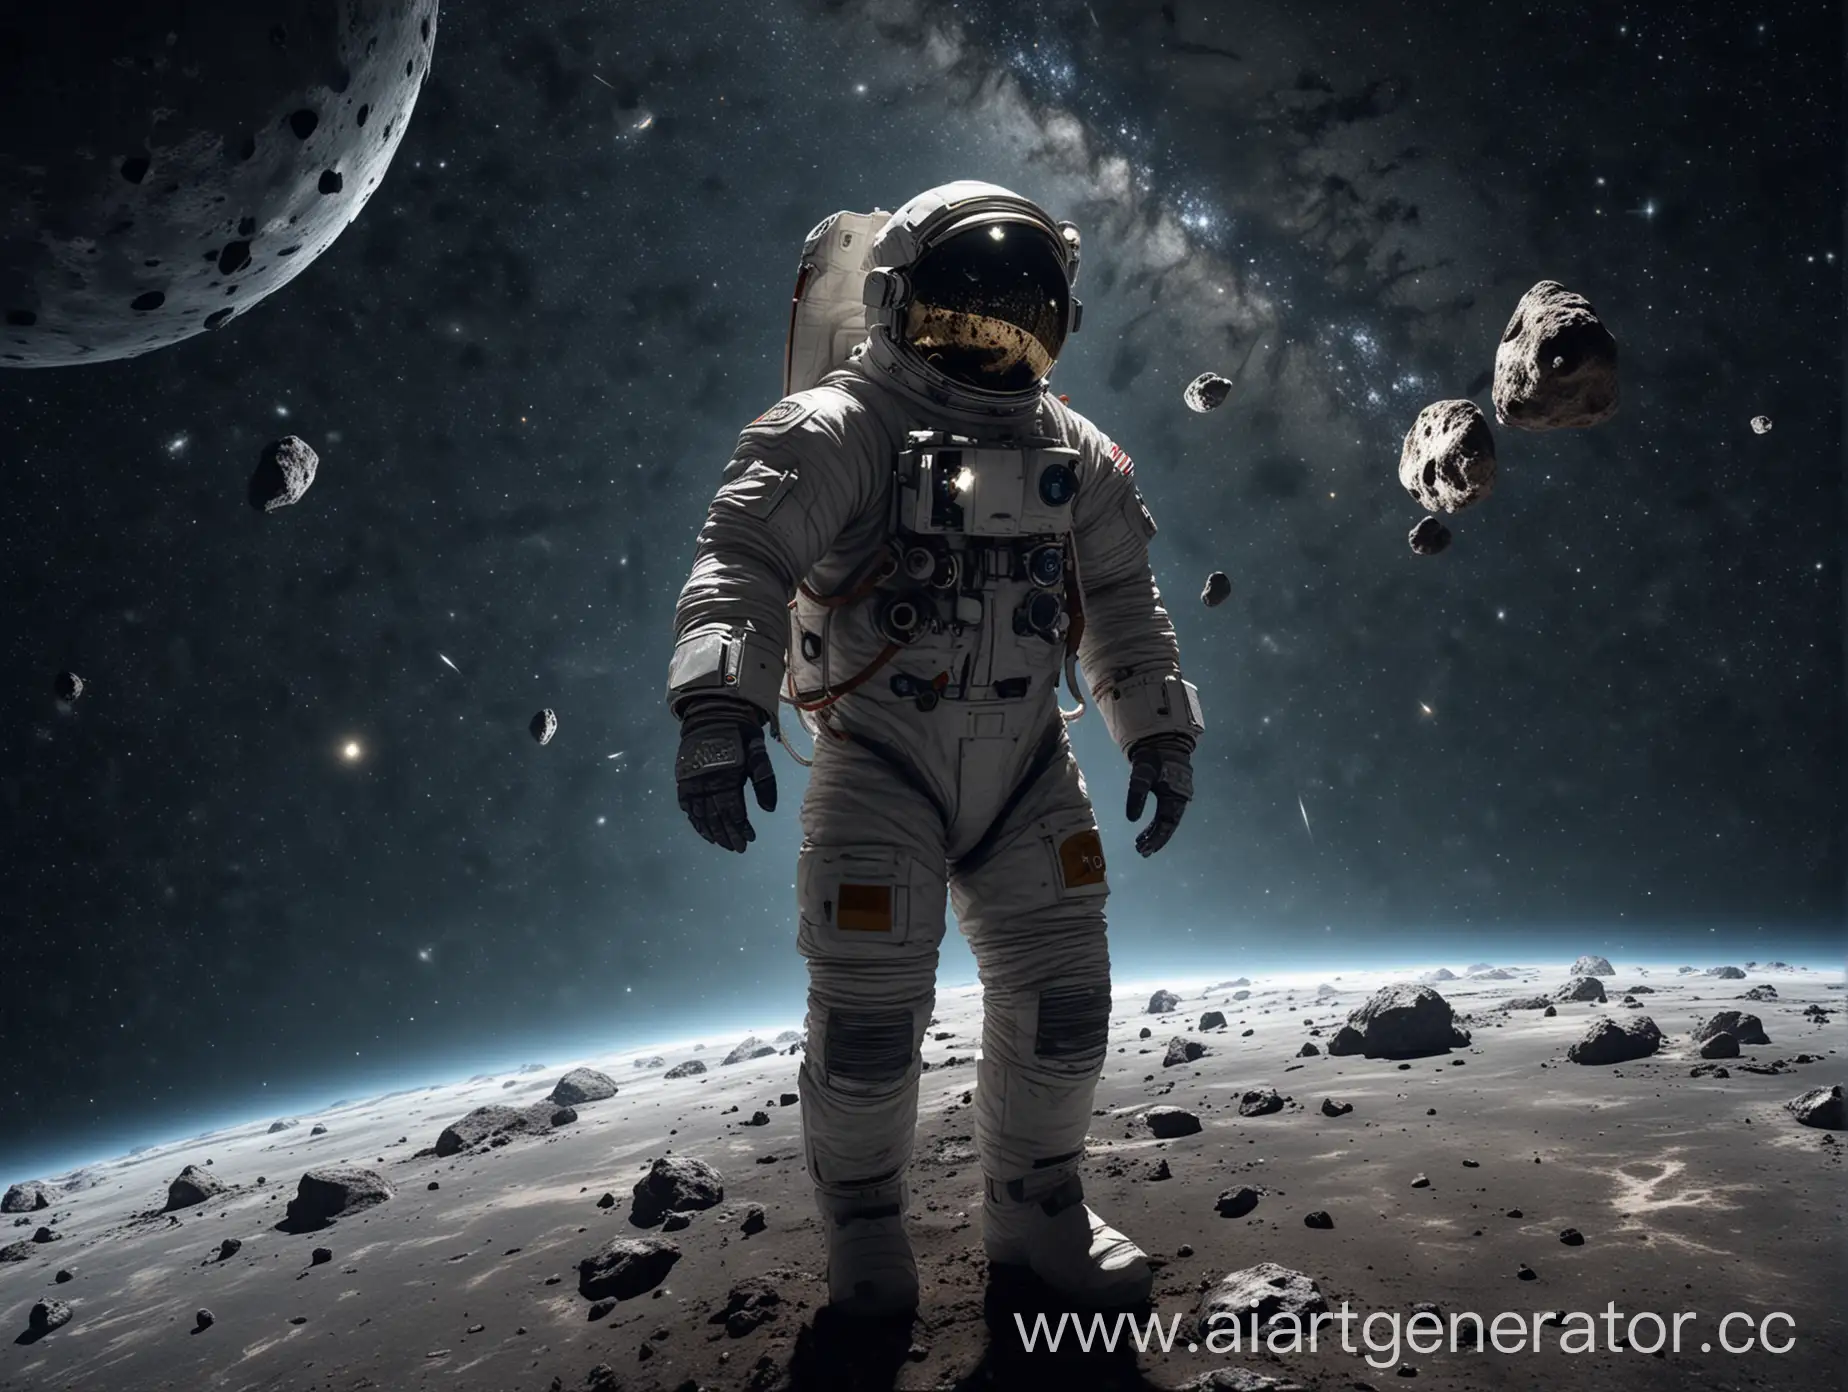 Astronaut-Floating-Among-Meteorites-in-a-Starry-Space